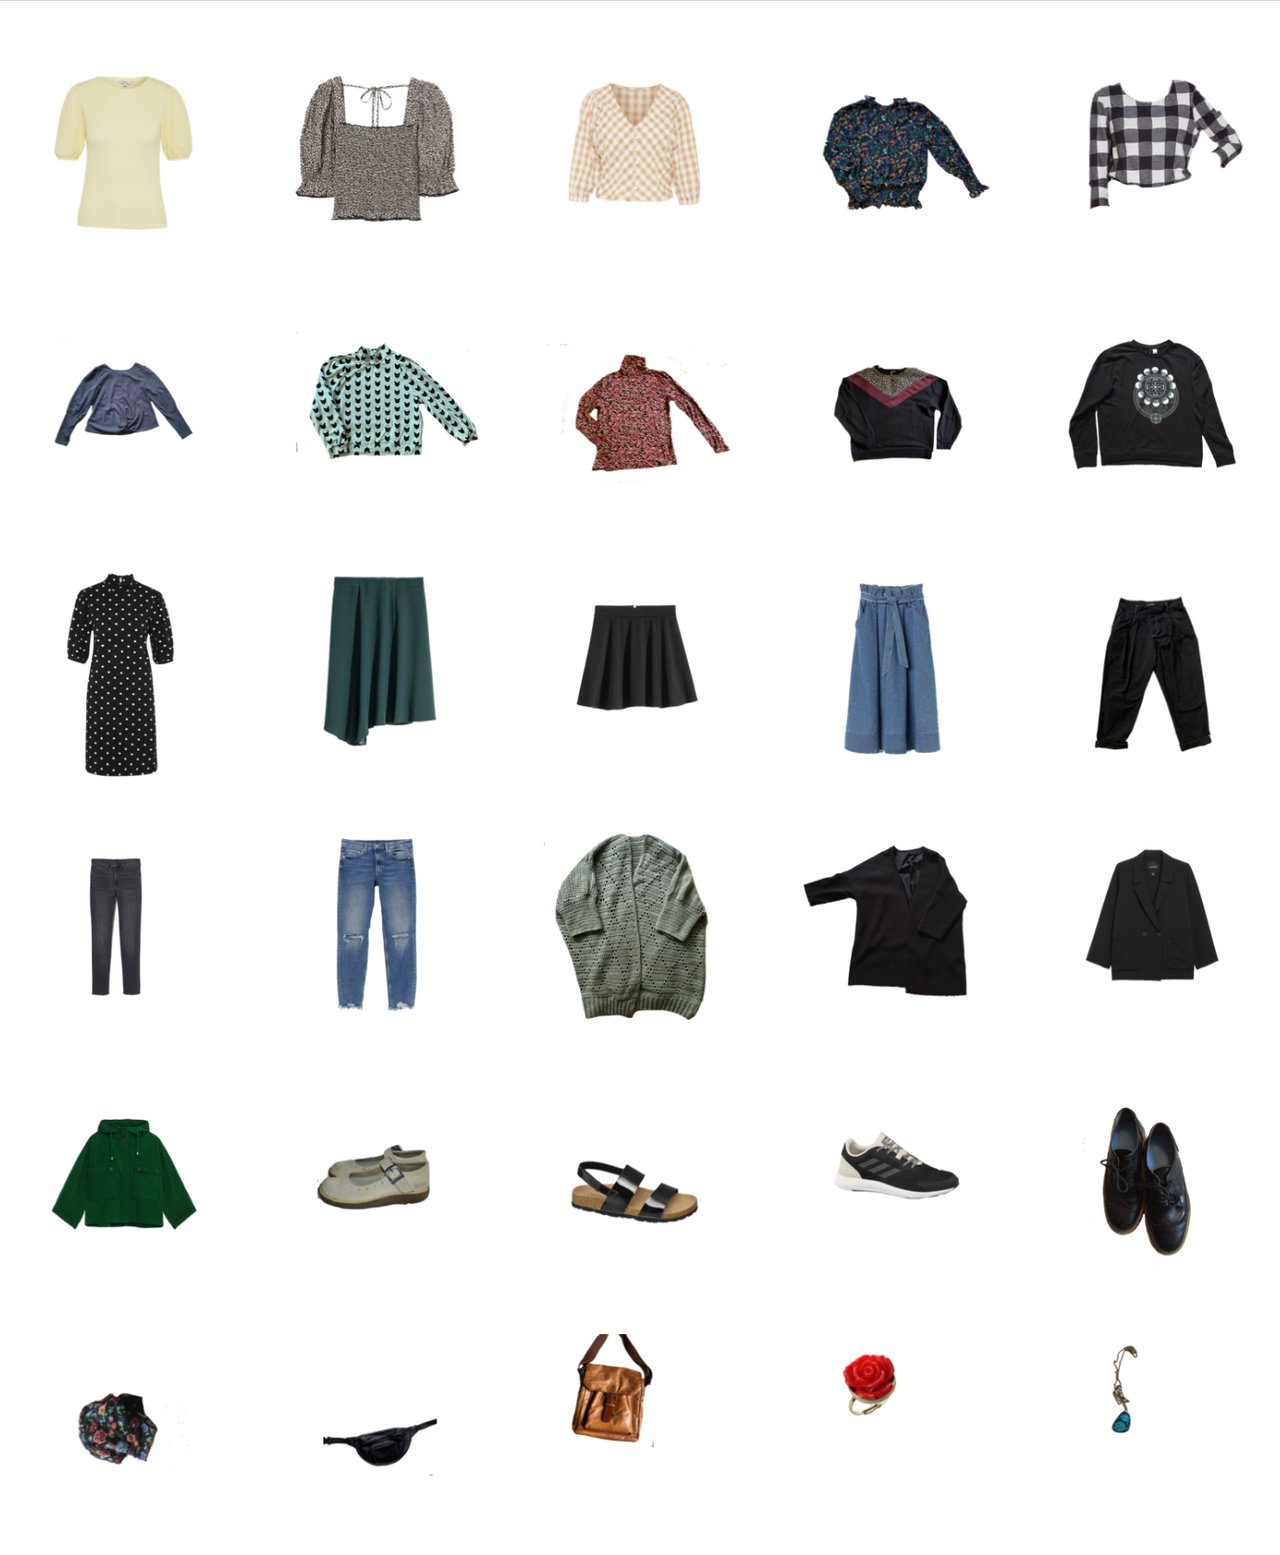 mint and black garment selection of a capsule closet